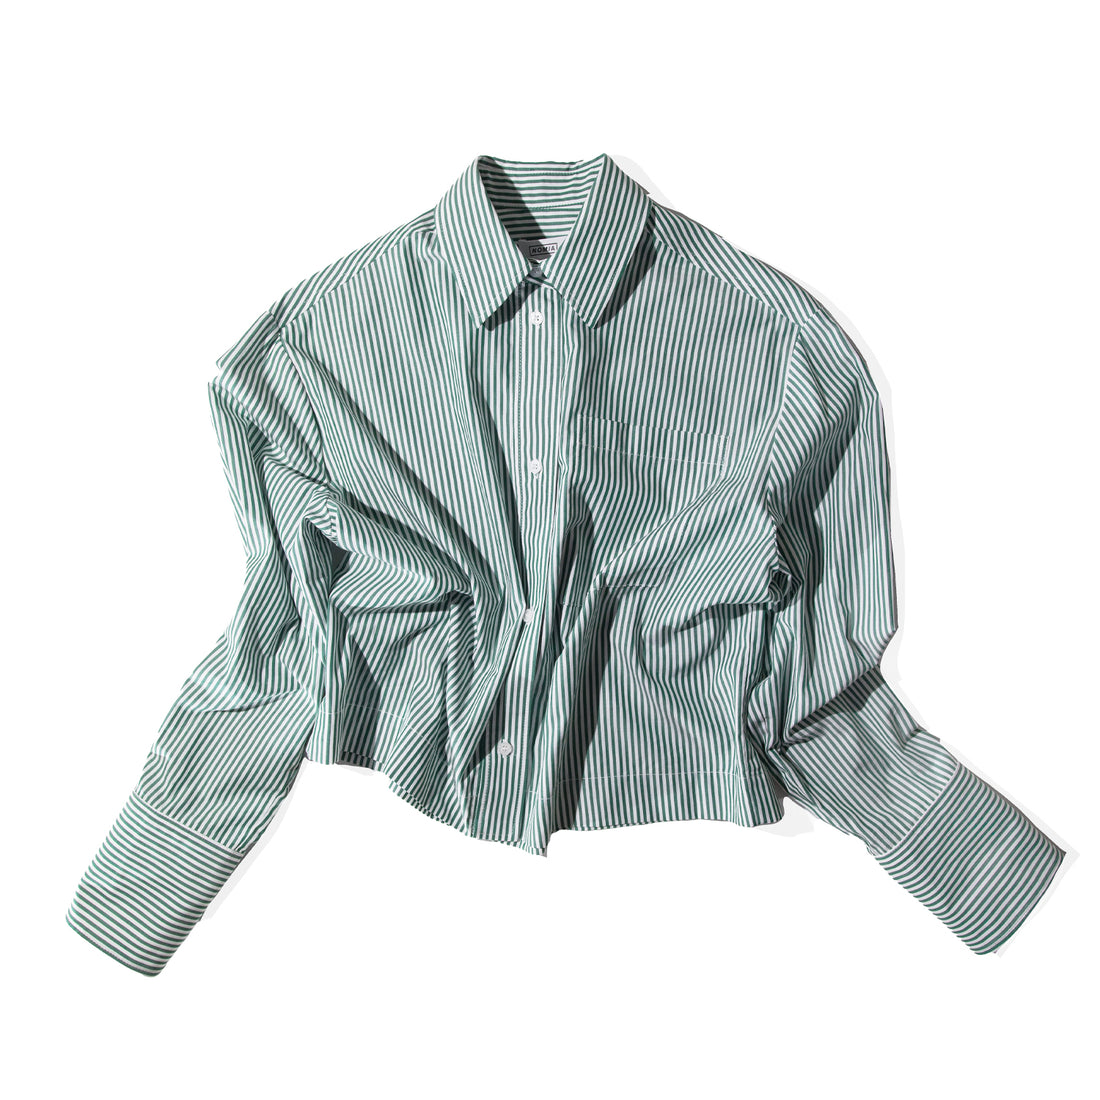 Nomia Cropped Button Down Shirt in Grass/White